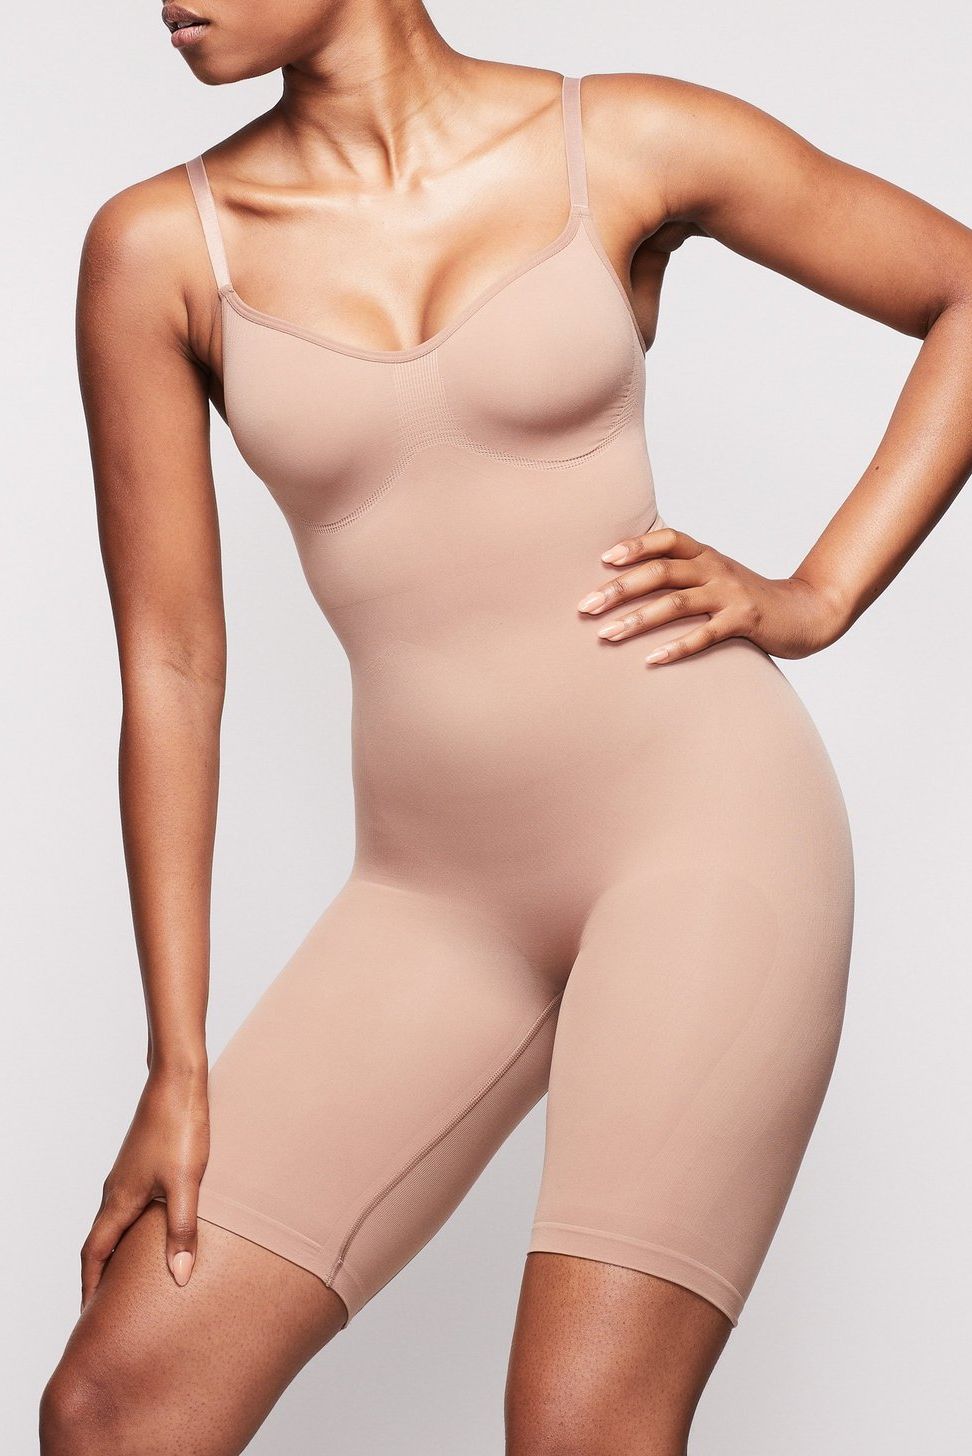 Check Out the Best and Highly Recommended Shapewear for Women in 2023 -  Beauty and Blush